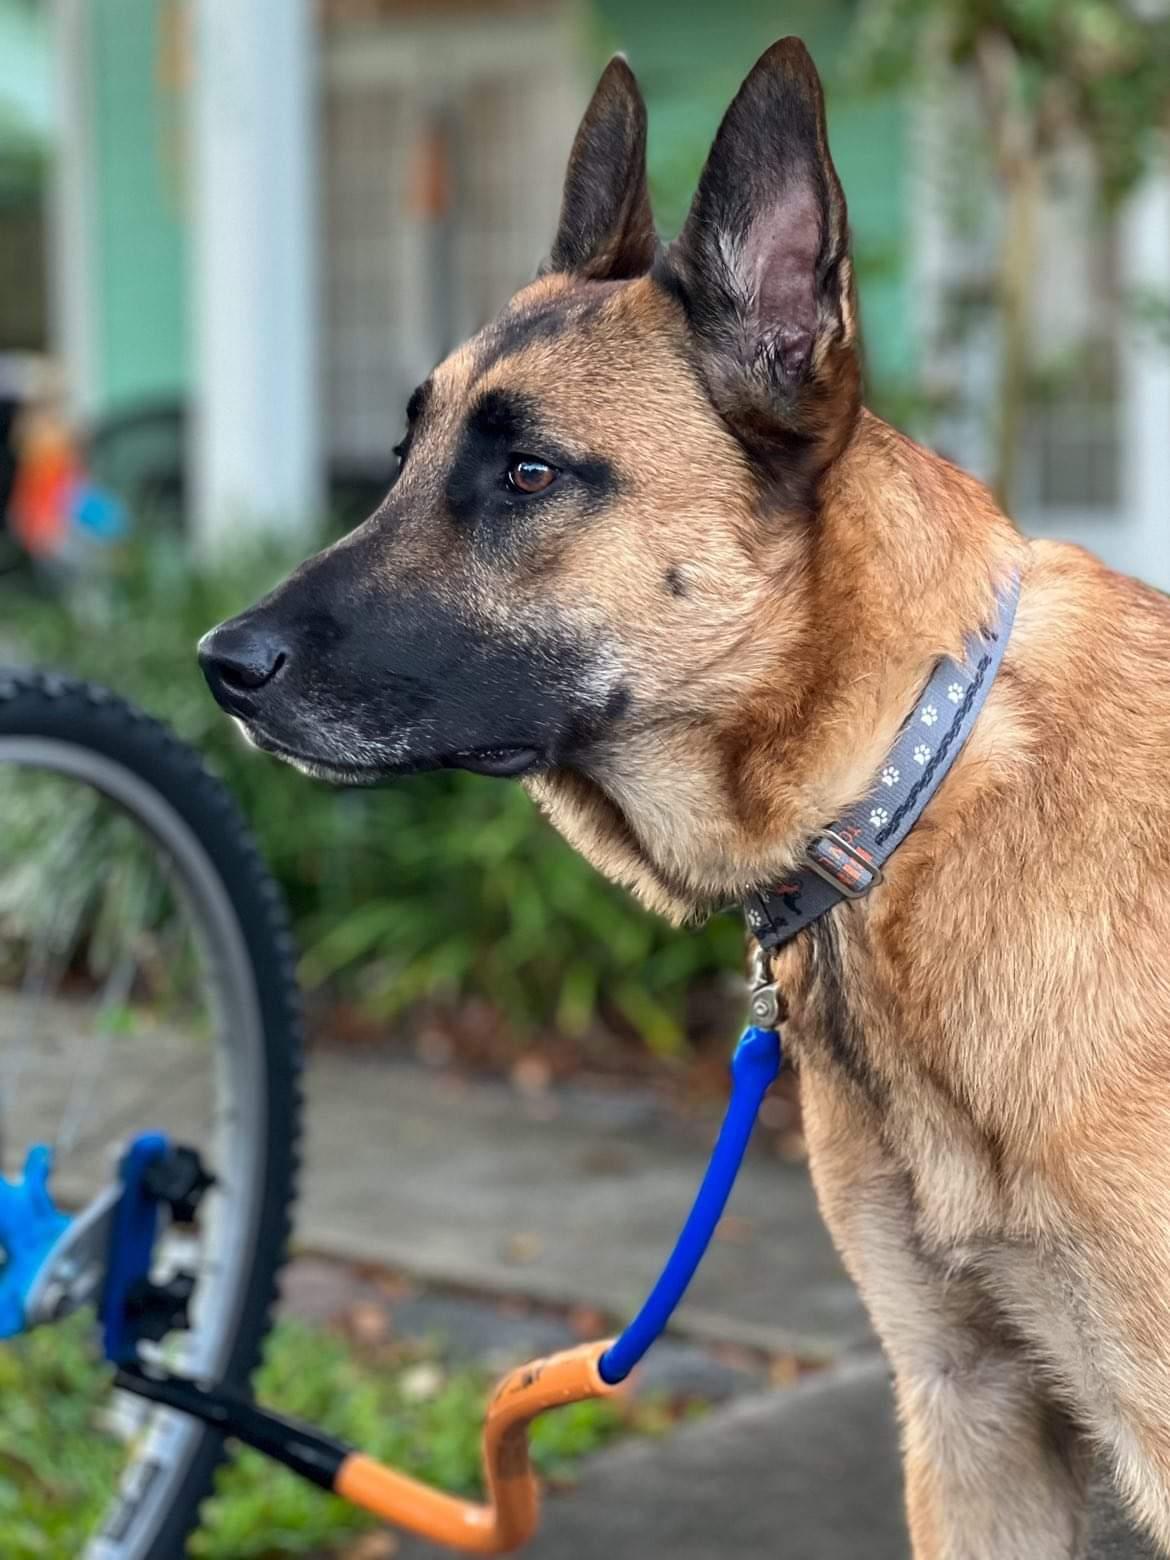 A Malinois Belgian Sheperd focuses to the left while wearing a grey collar; on it an orange "BIKE TOW LEASH" logo and decorative bike tire tracks and paw prints side by side. The Malinois is also clipped to an orange Bike Tow Leash attached to a bike offscreen. 